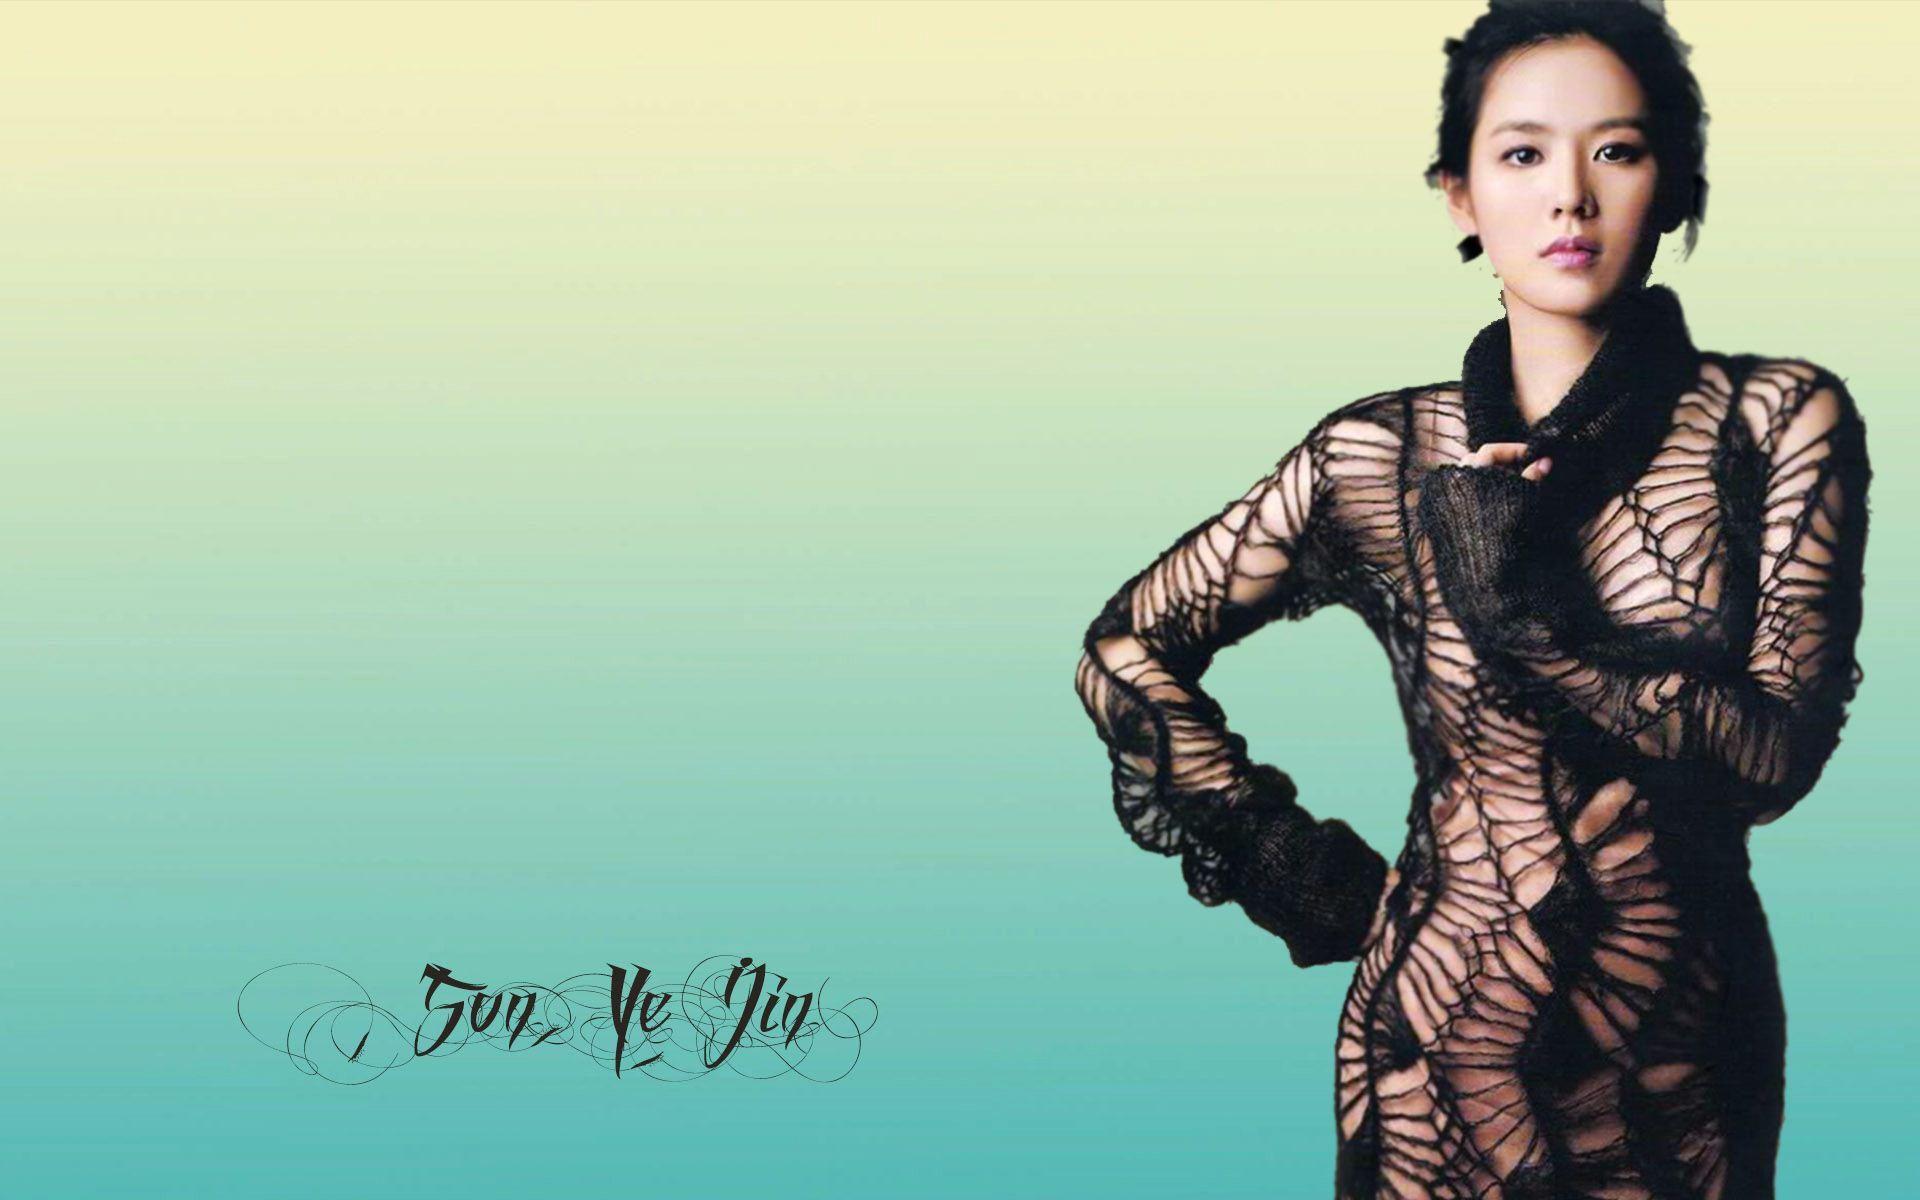 Son Ye Jin Wallpaper High Resolution and Quality Download